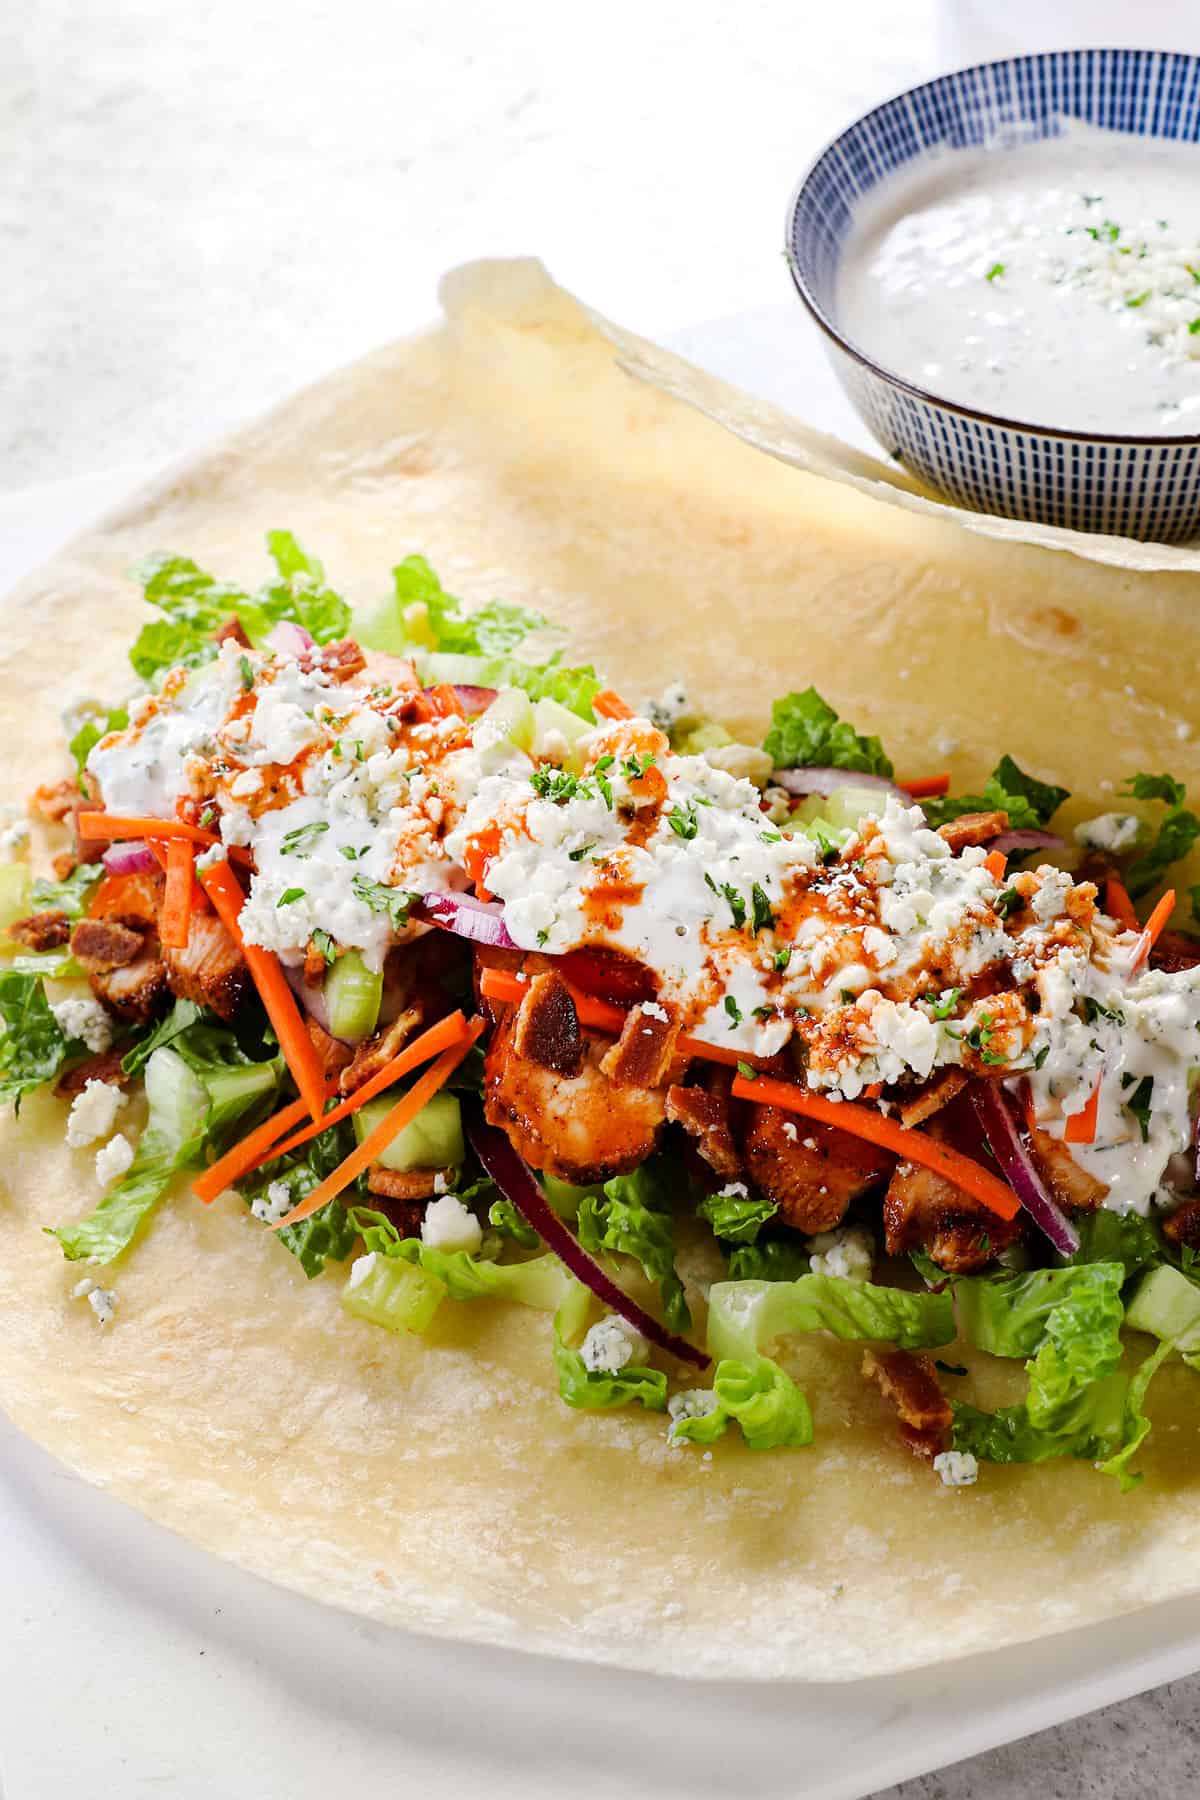 showing how to make buffalo chicken wraps by layering a tortilla with lettuce, buffalo chicken, red onions, carrots, celery and blue cheese dressing